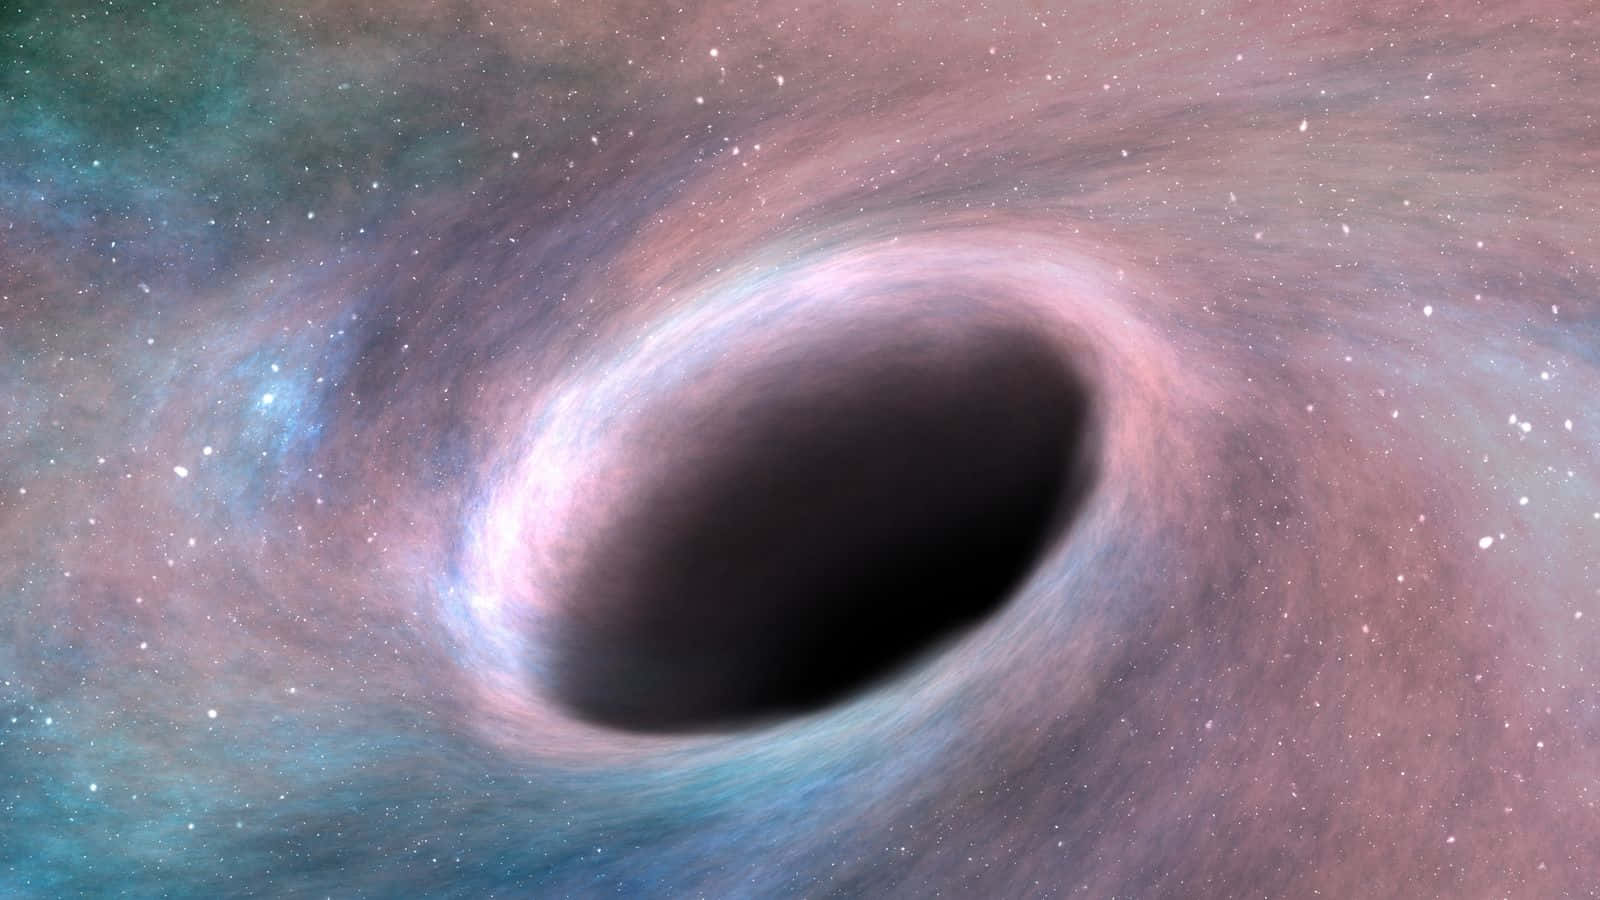 “View of a Black Hole from the Hubble Telescope”